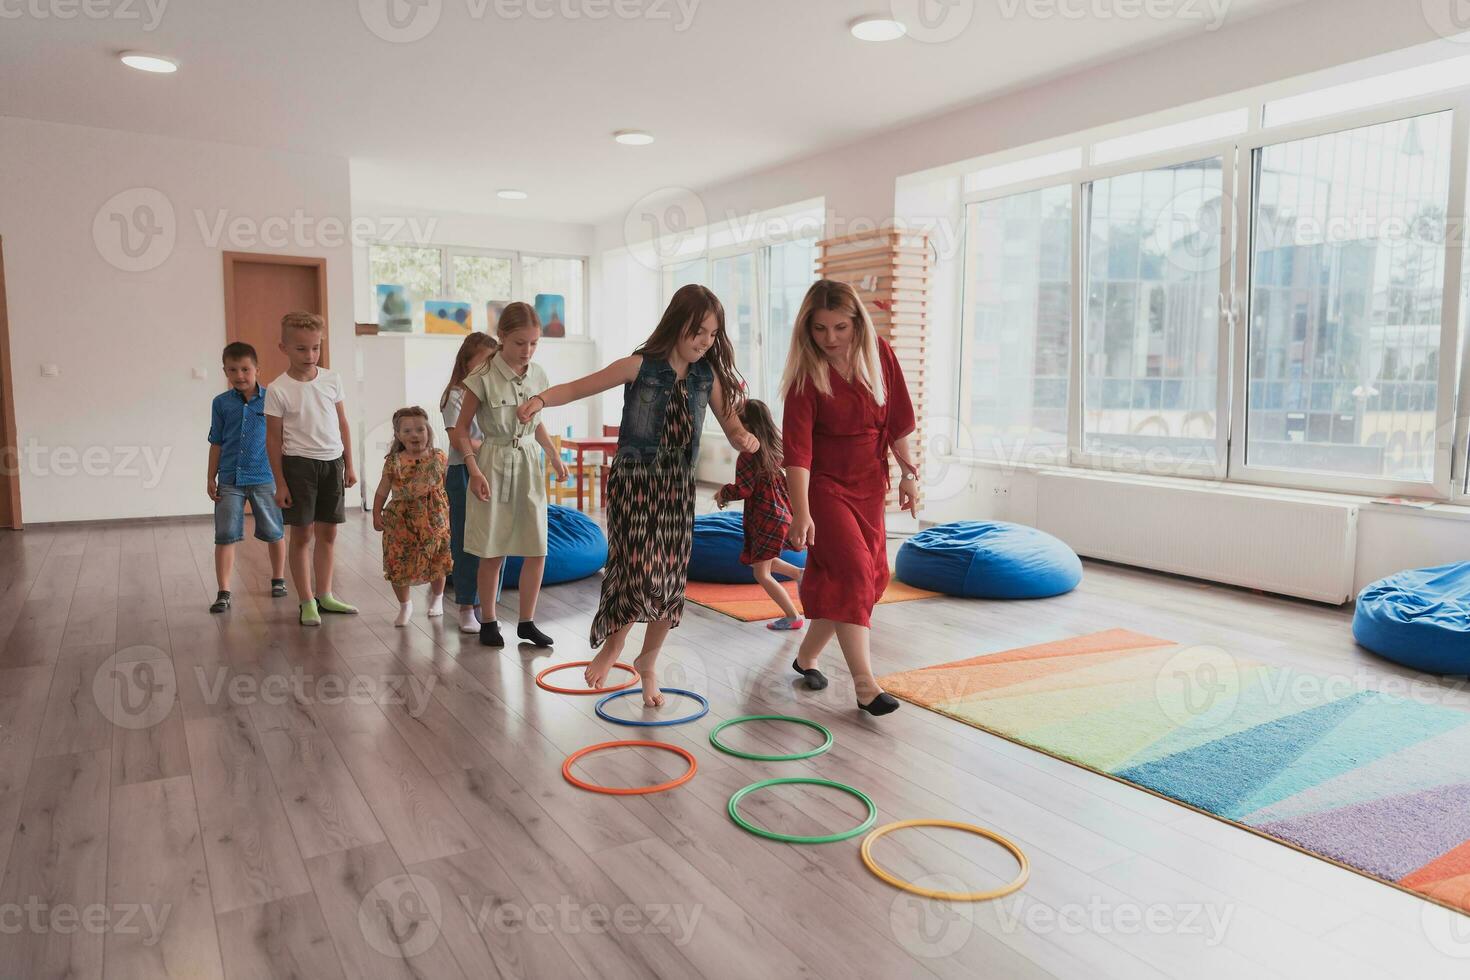 Small nursery school children with female teacher on floor indoors in classroom, doing exercise. Jumping over hula hoop circles track on the floor. photo